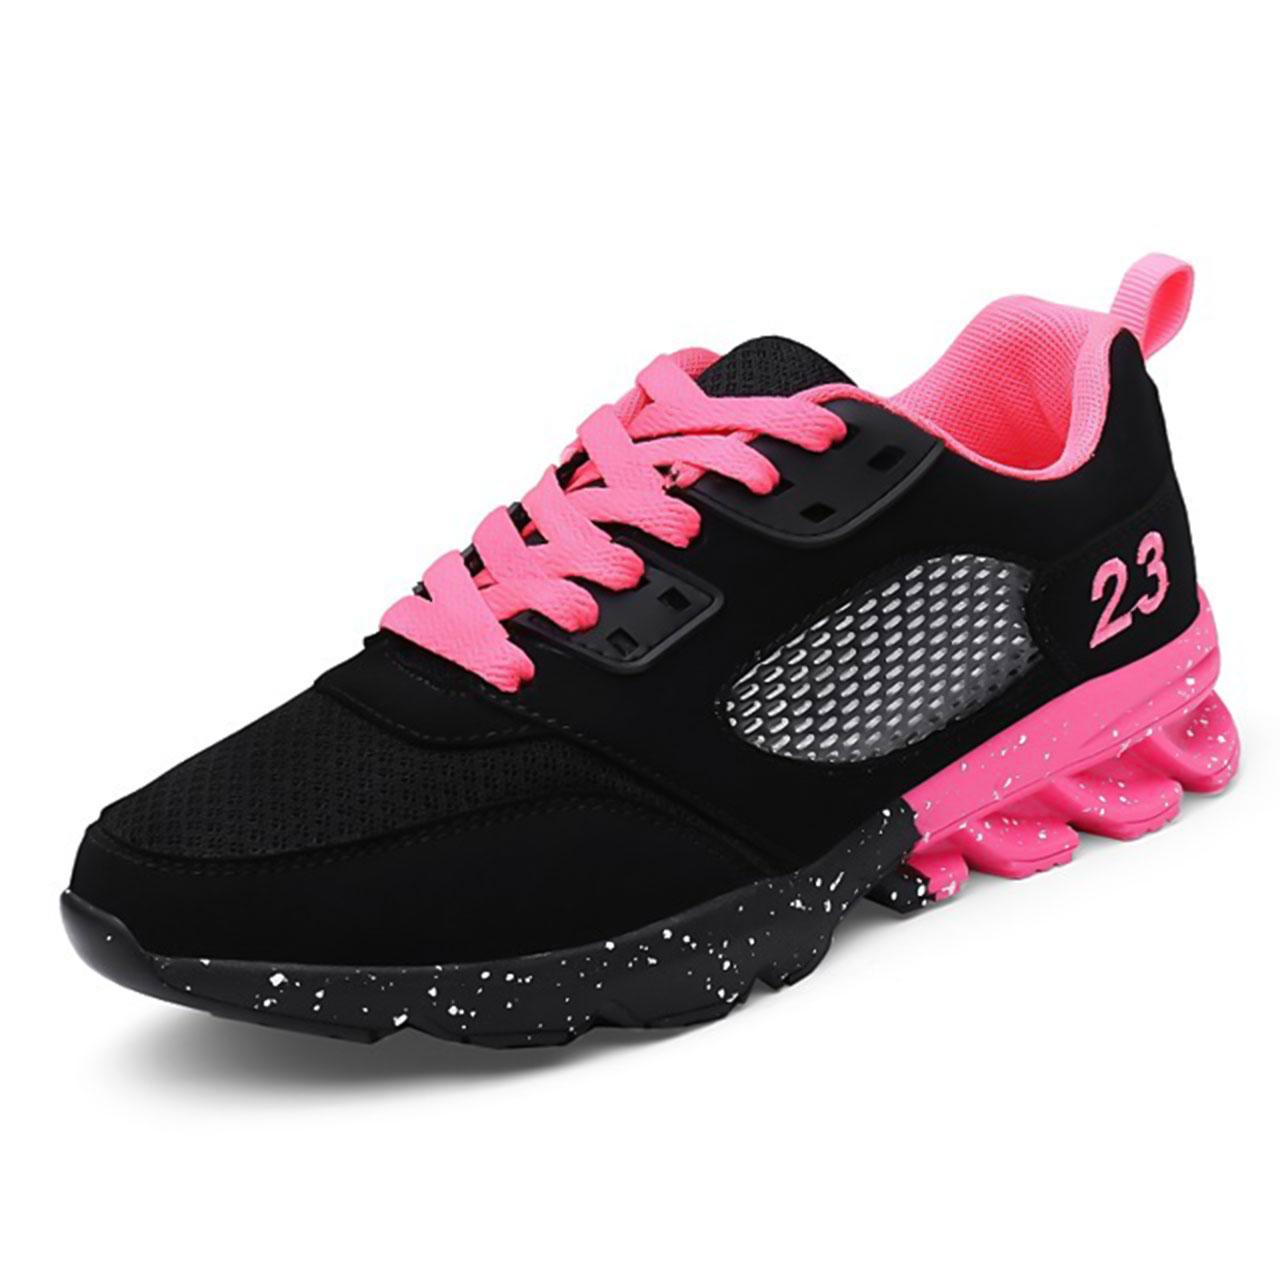 tulle athletic shoes